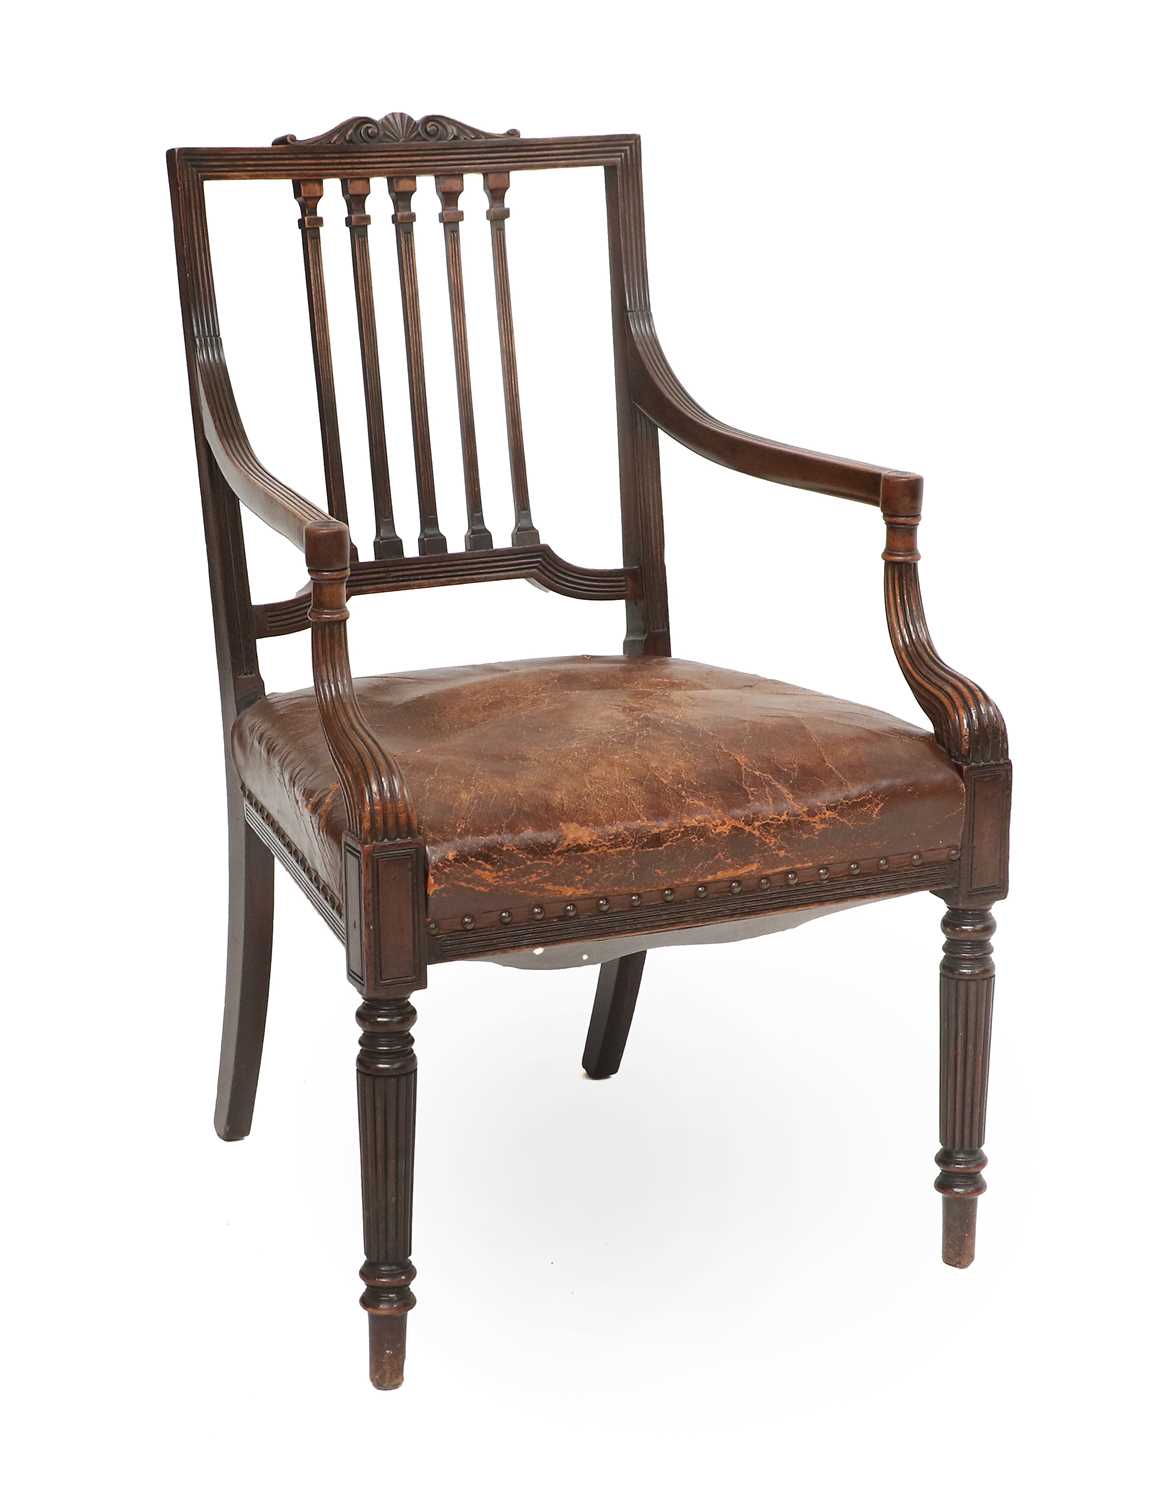 An Early 19th Century Mahogany Armchair, in the manner of Gillows, the reeded frame with acanthus